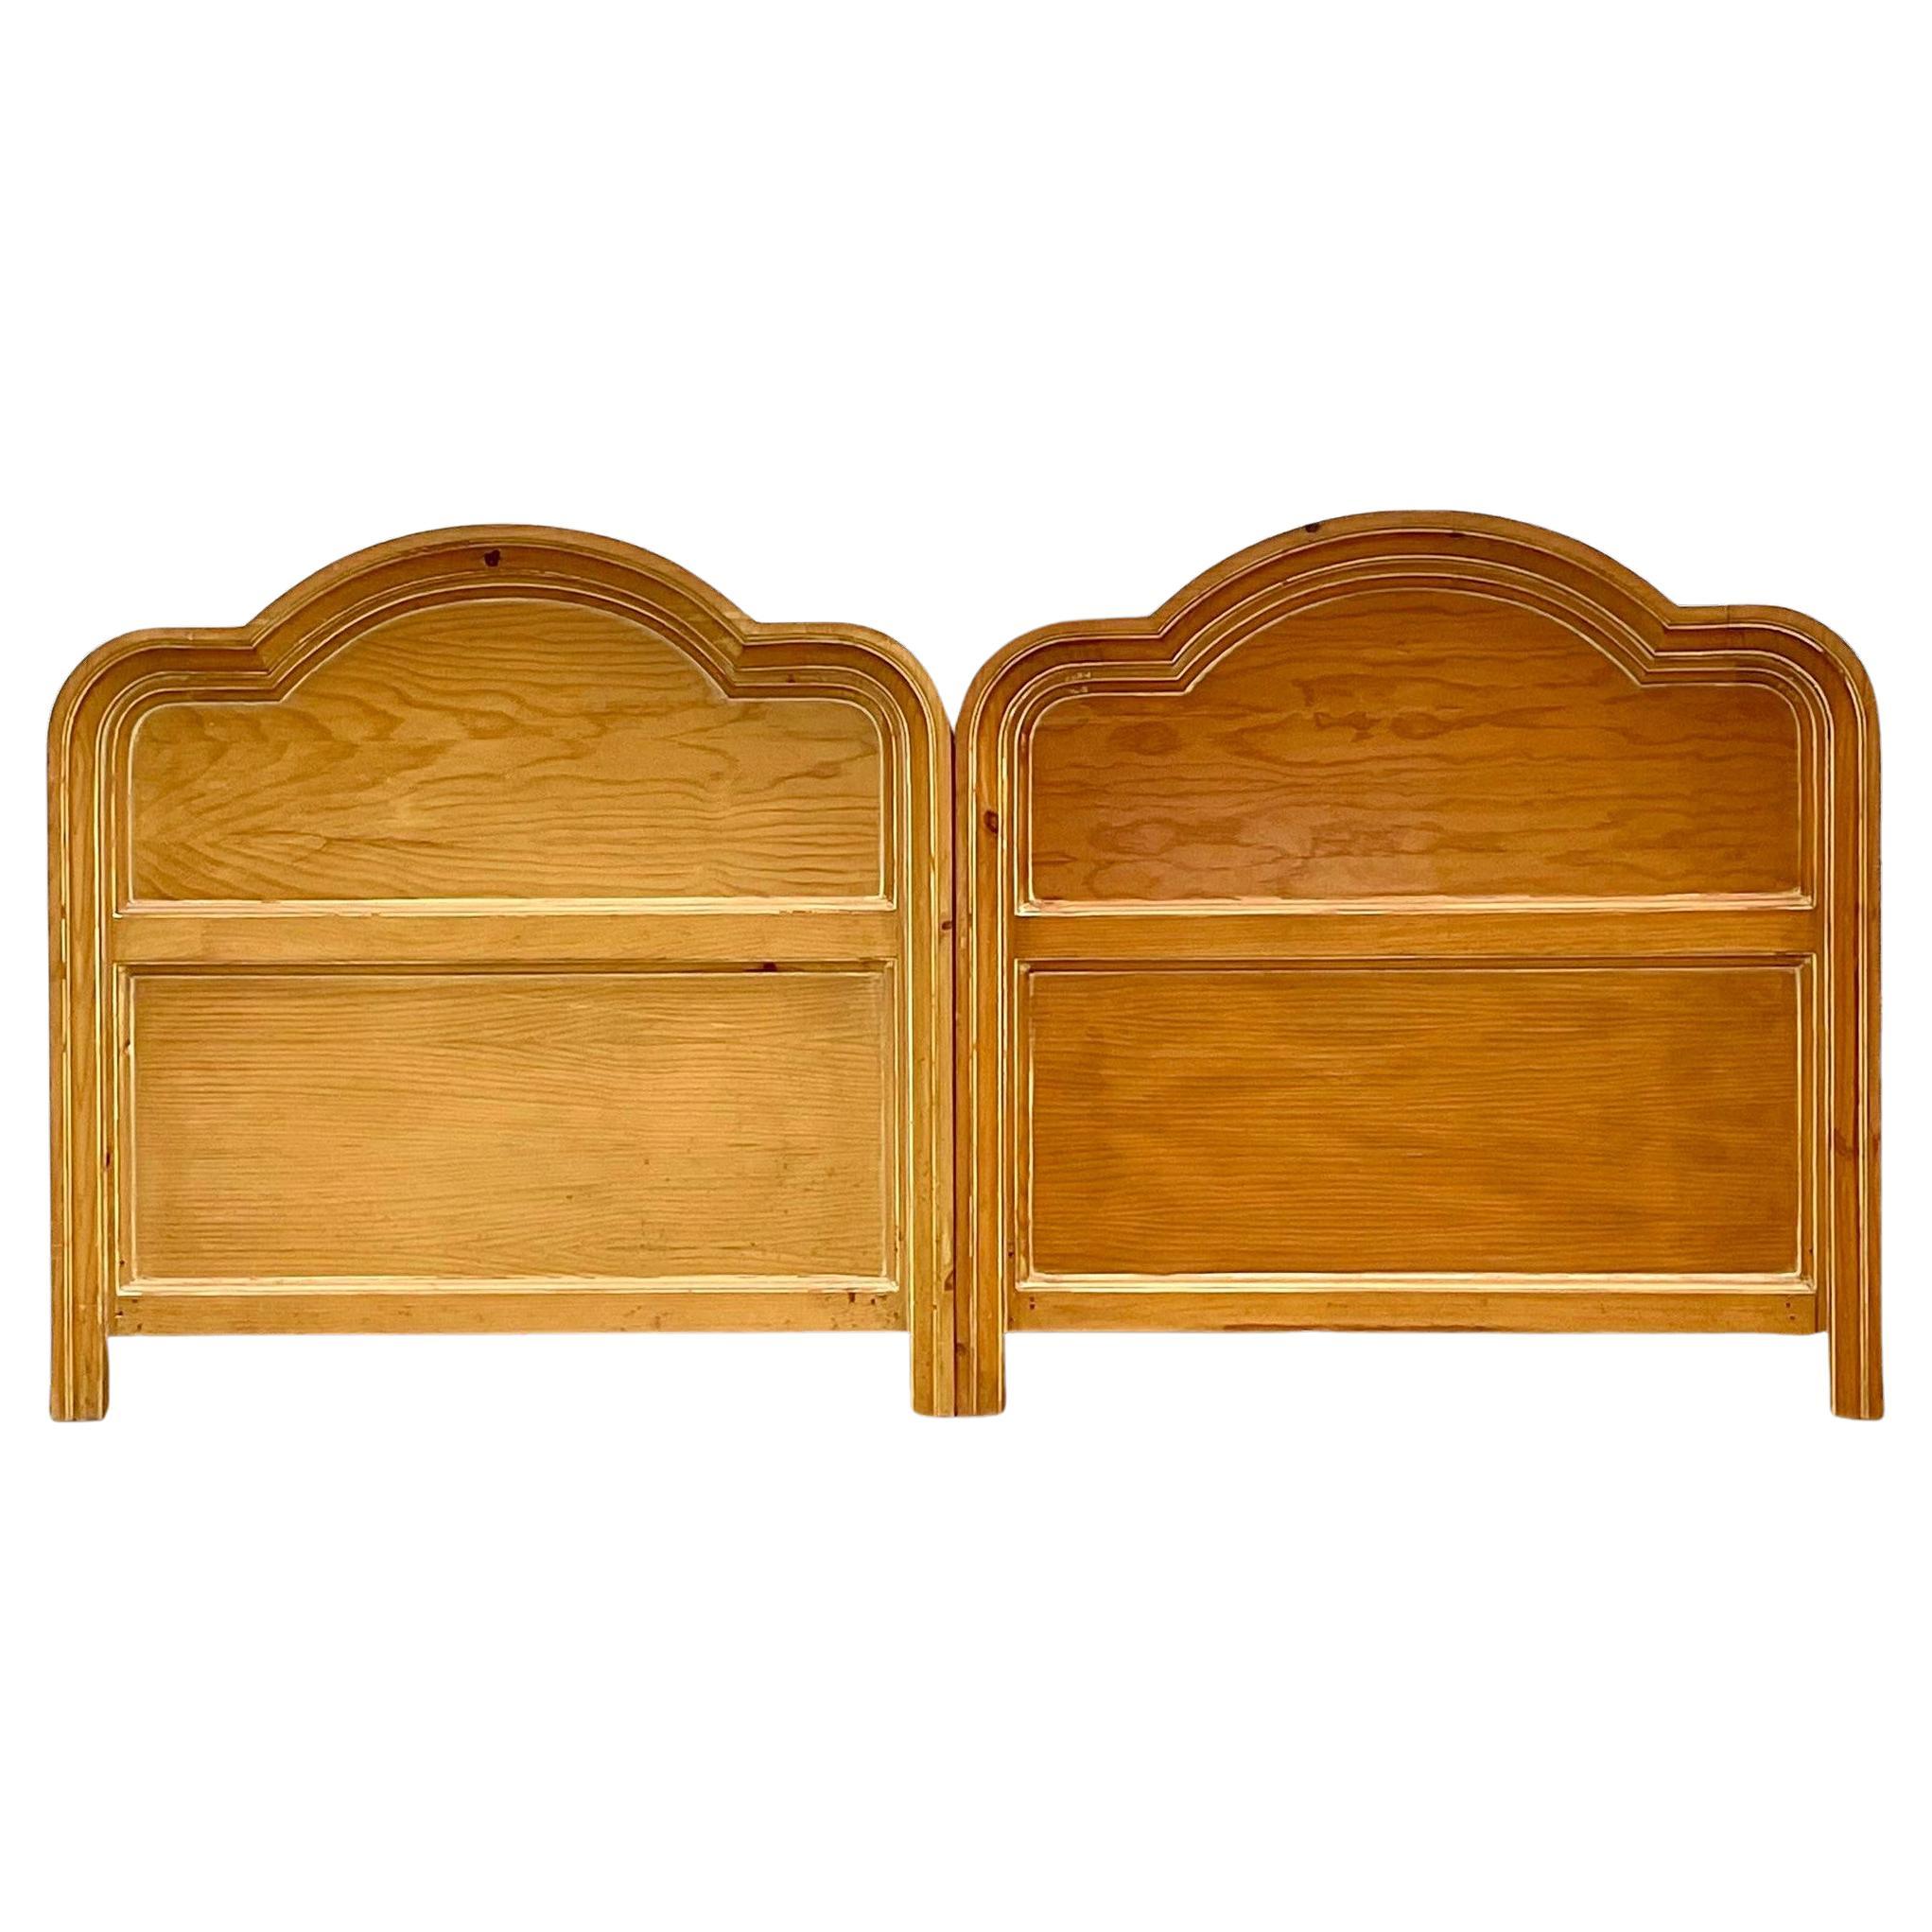 Late 20th Century Vintage Wooden Trim Detailed Twin Headboards - A Pair For Sale